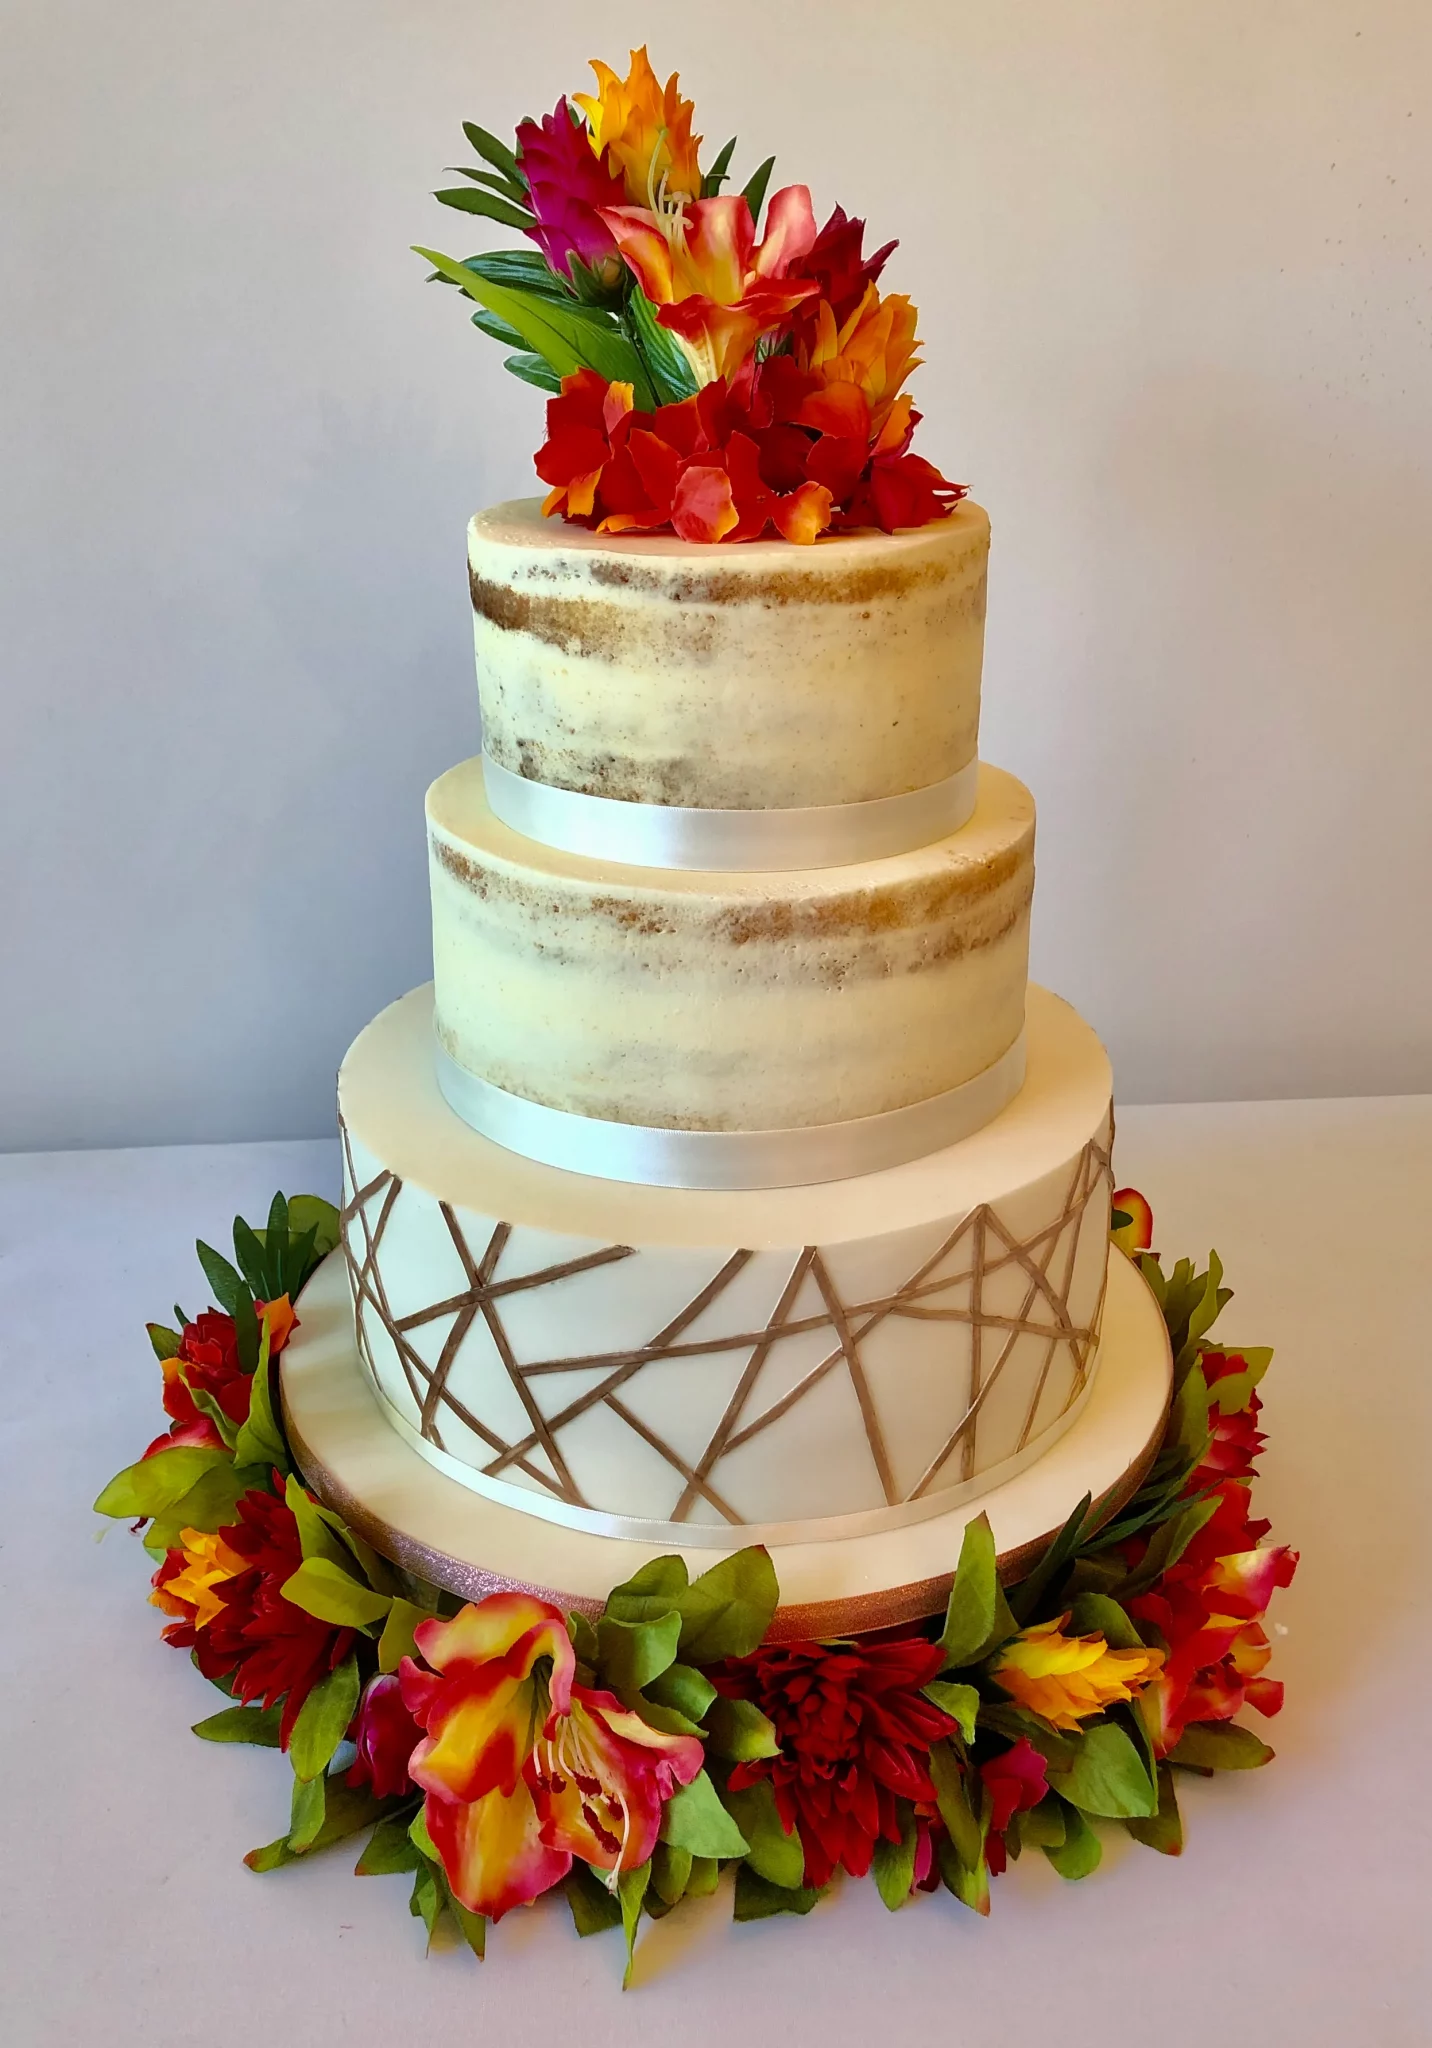 naked theme wedding cakes with flowers on it